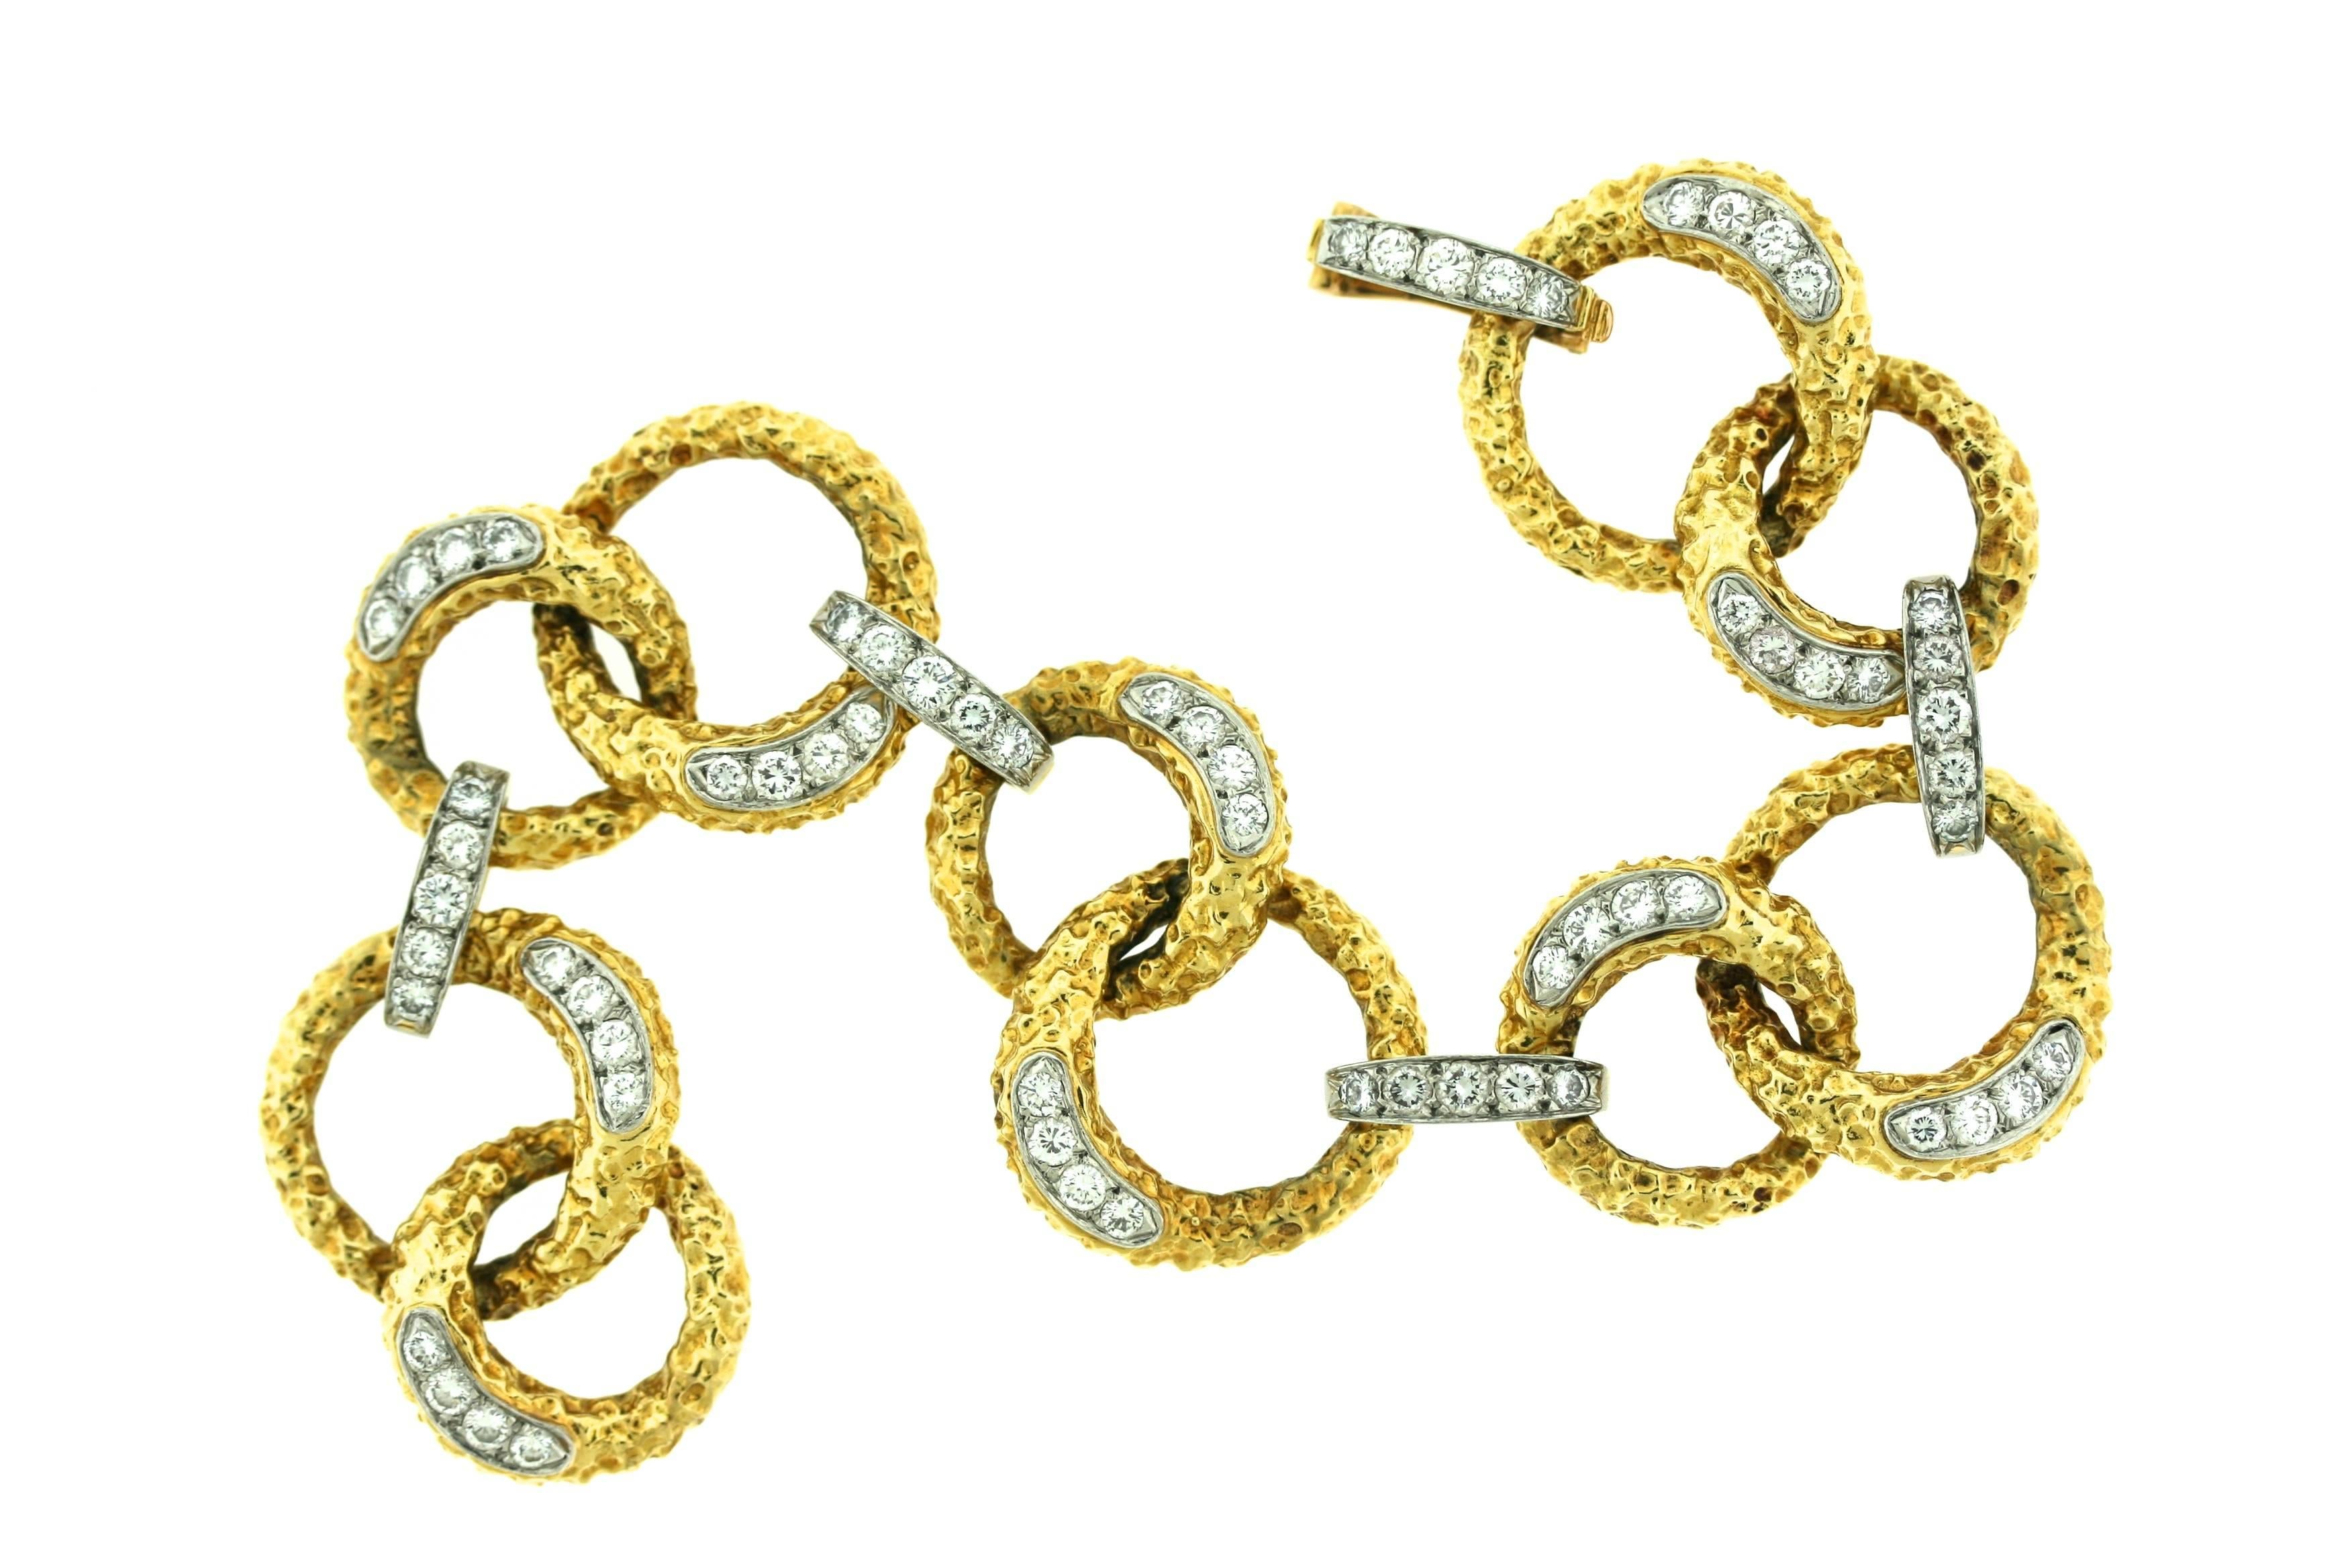 M Gerard 18k textured gold and diamond bracelet designed as circular pairs of links alternating with diamond set horizontal links. A total of 65 diamonds weigh approximately four carats. 8